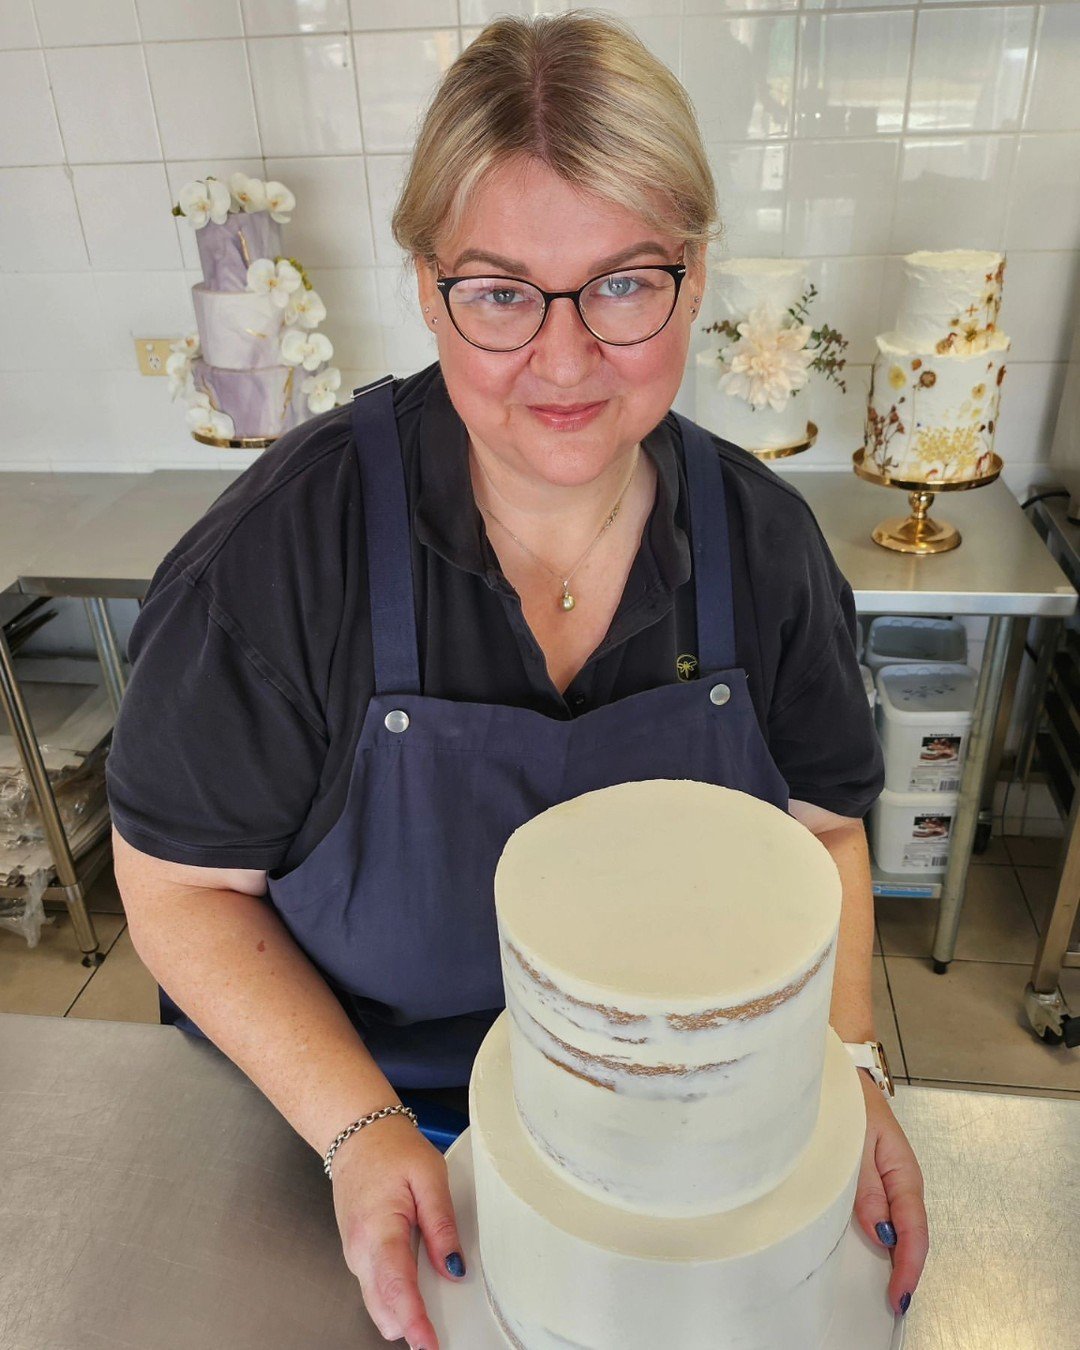 It&rsquo;s Me, Hi! 👋🏻

I'm Fiona &amp; the owner of @dragonflycakes . I have an absolute passion for weddings and events and I love talking all things cake, but above all I believe that life is too short to eat bad cake - so when you choose our cak